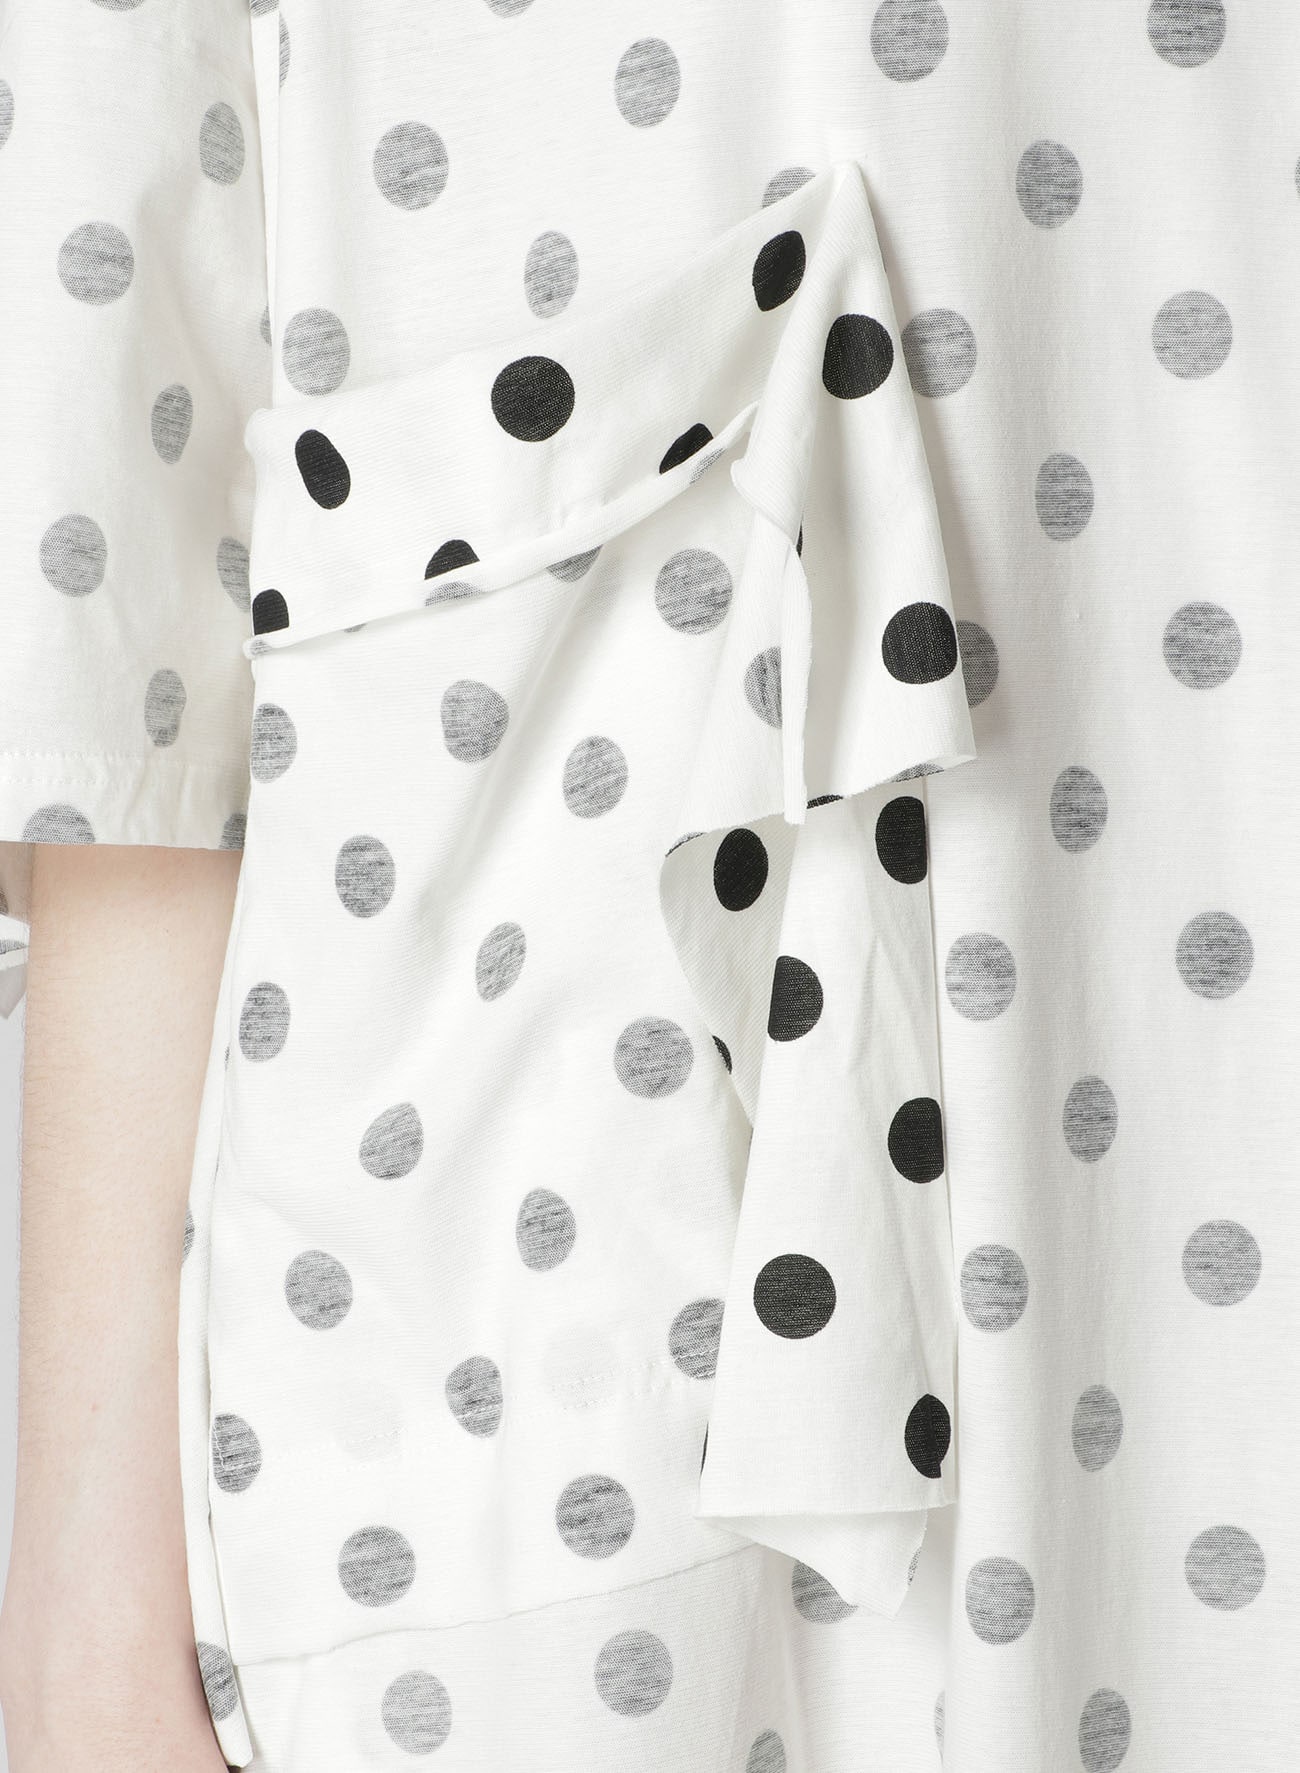 POLKA DOT PRINT DRESS WITH RIGHT CHEST POCKET